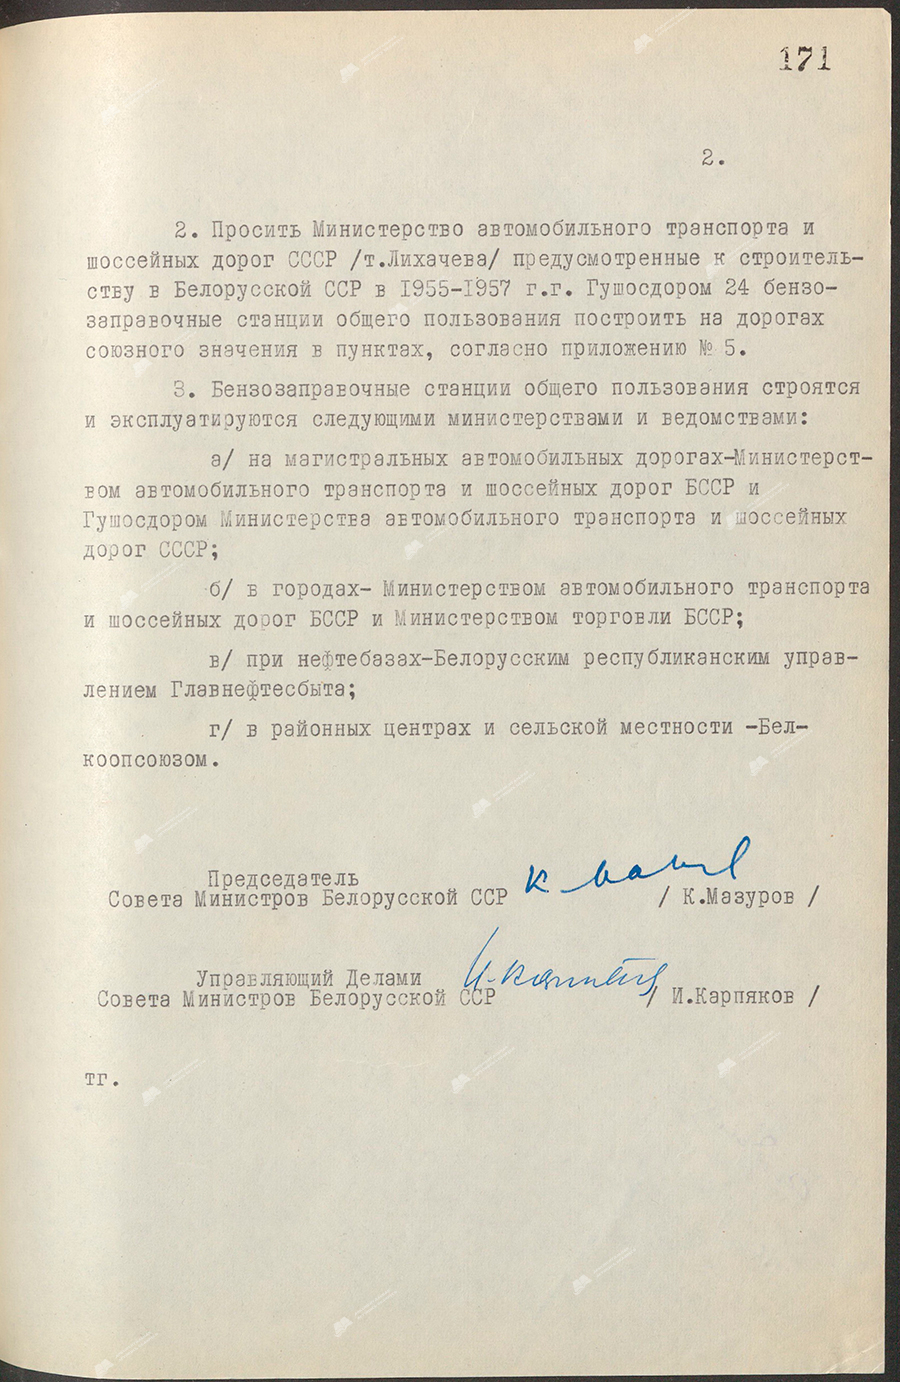 Resolution No. 1021 of the Council of Ministers of the Byelorussian SSR «On the construction of public gas filling stations in the republic»-с. 1